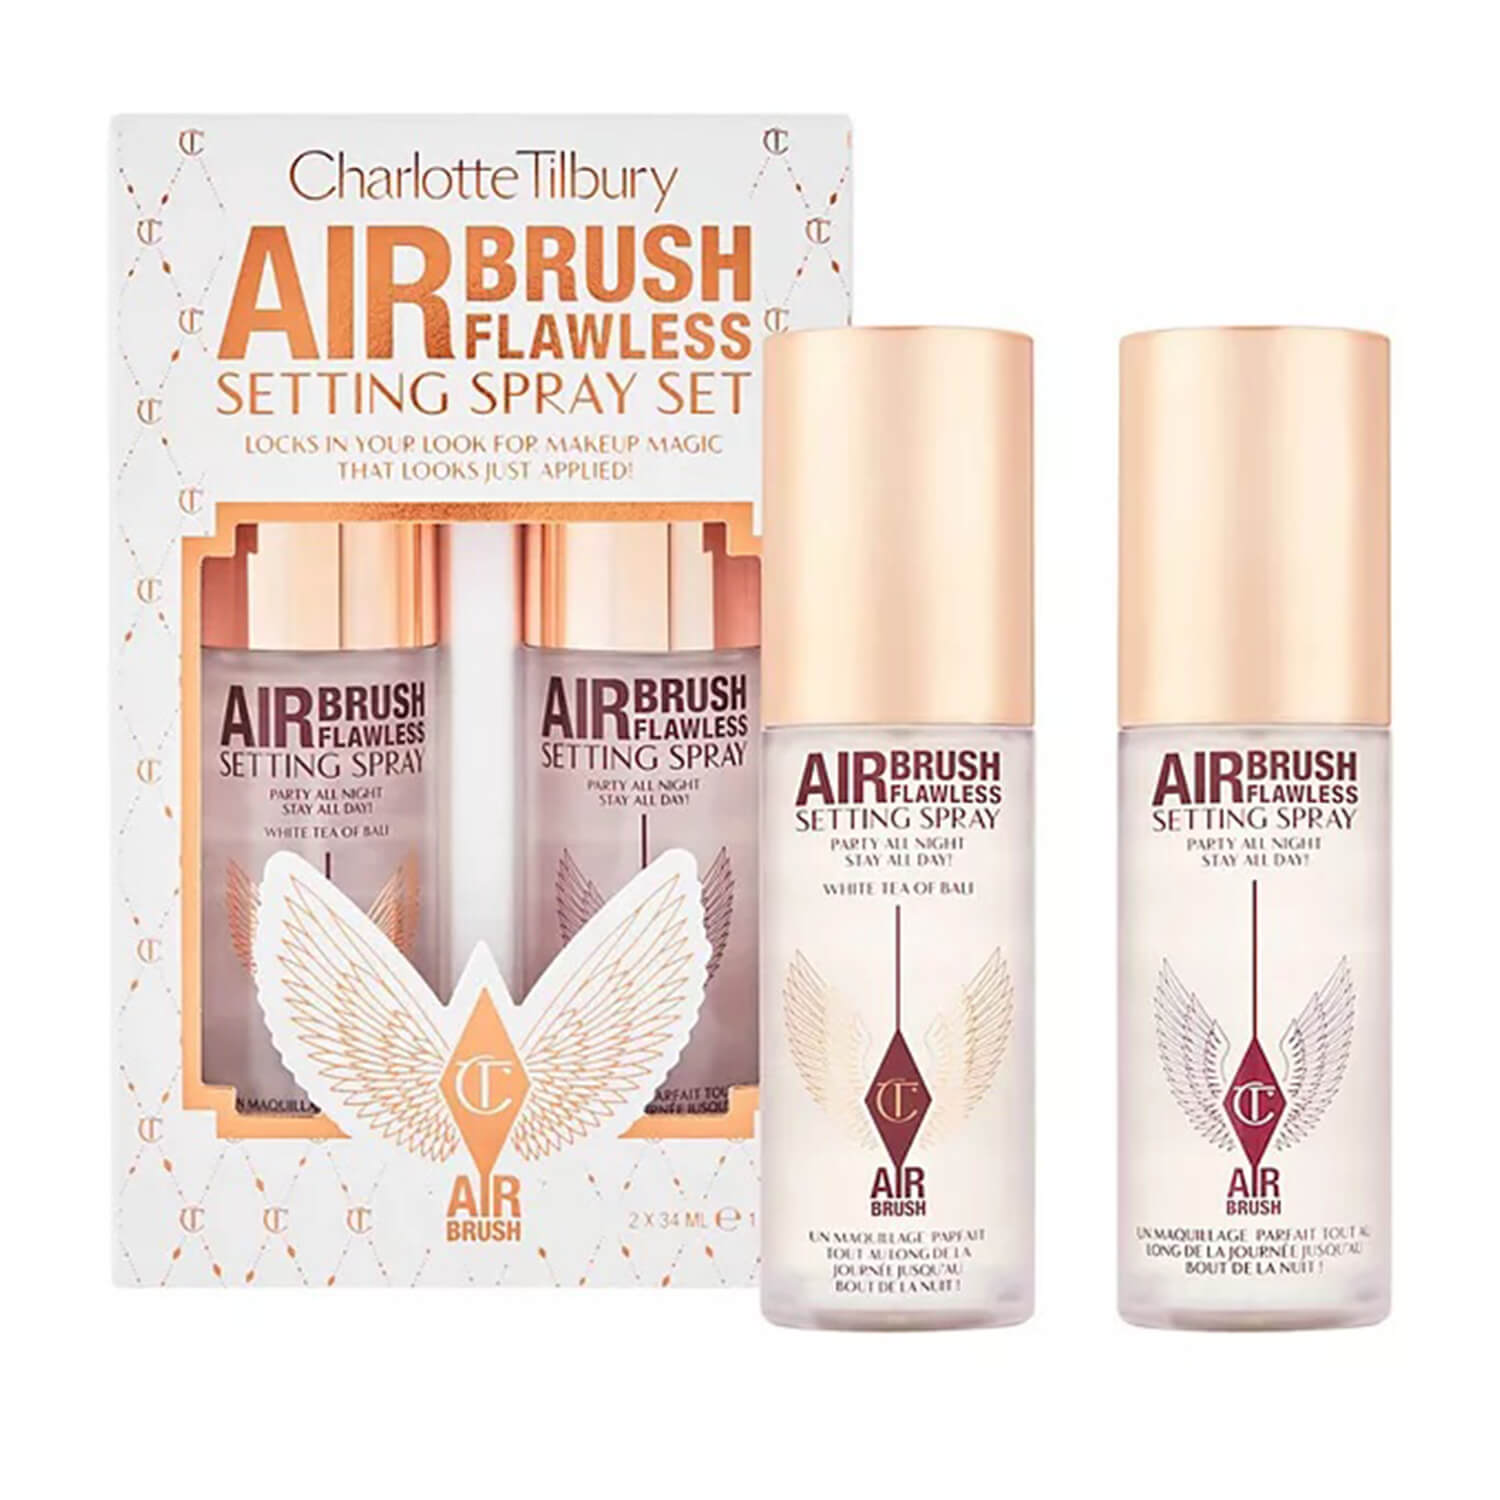 12HR Wear Test + Review: Charlotte Tilbury Airbrush Flawless Setting Spray, Your Girl Jess